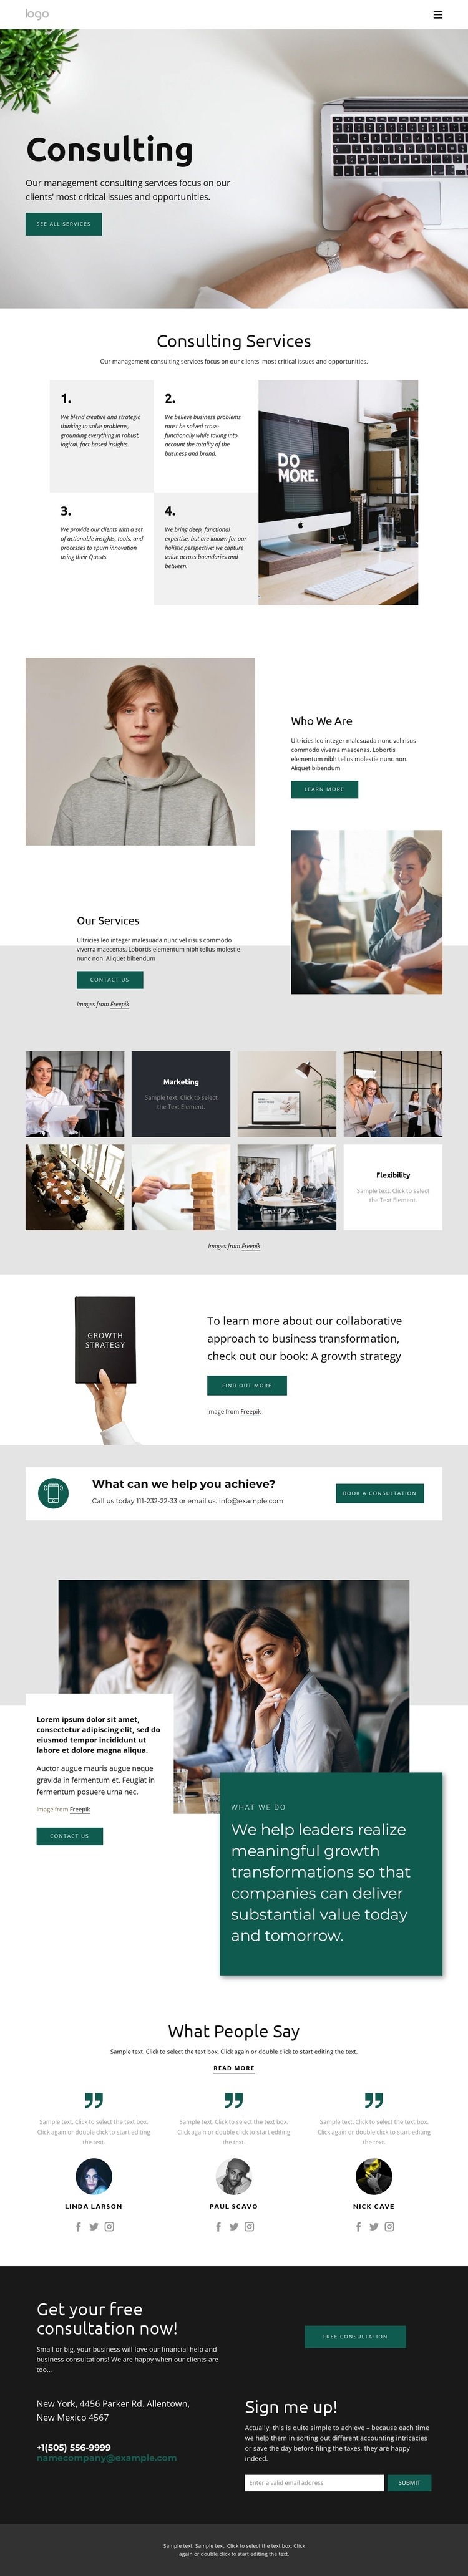 Business consultant company Homepage Design